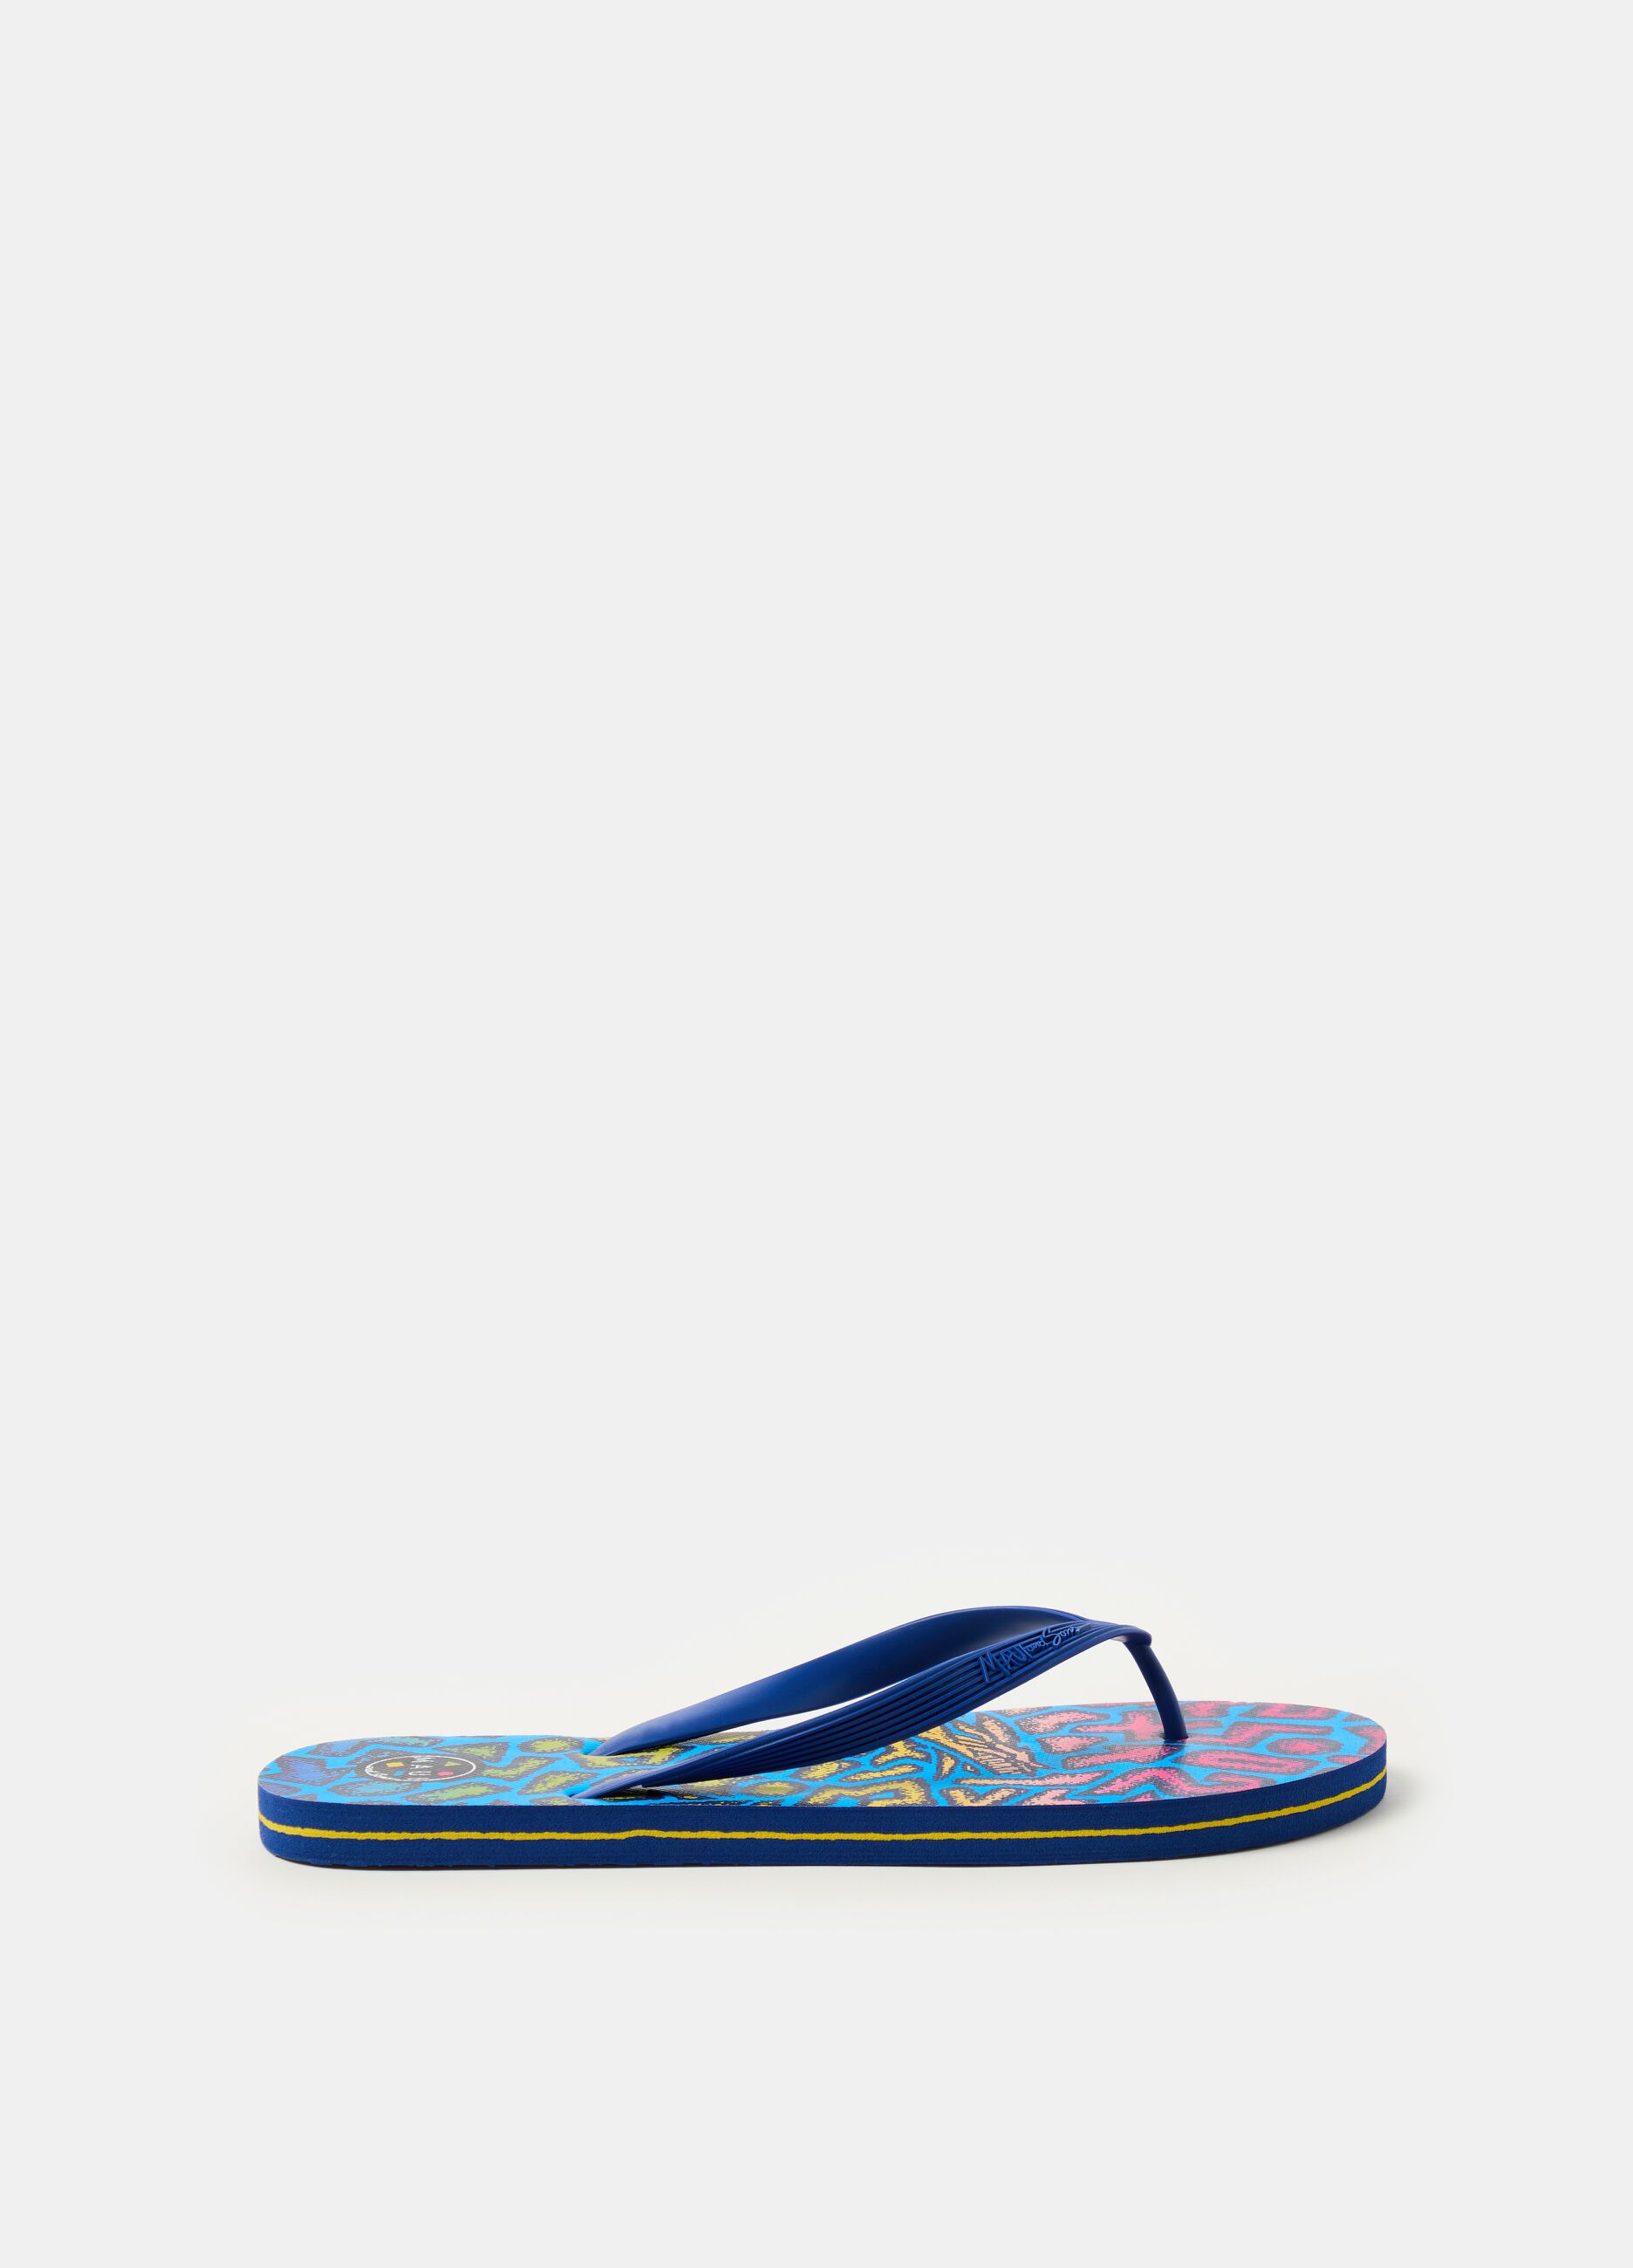 Thong sandals with lettering print